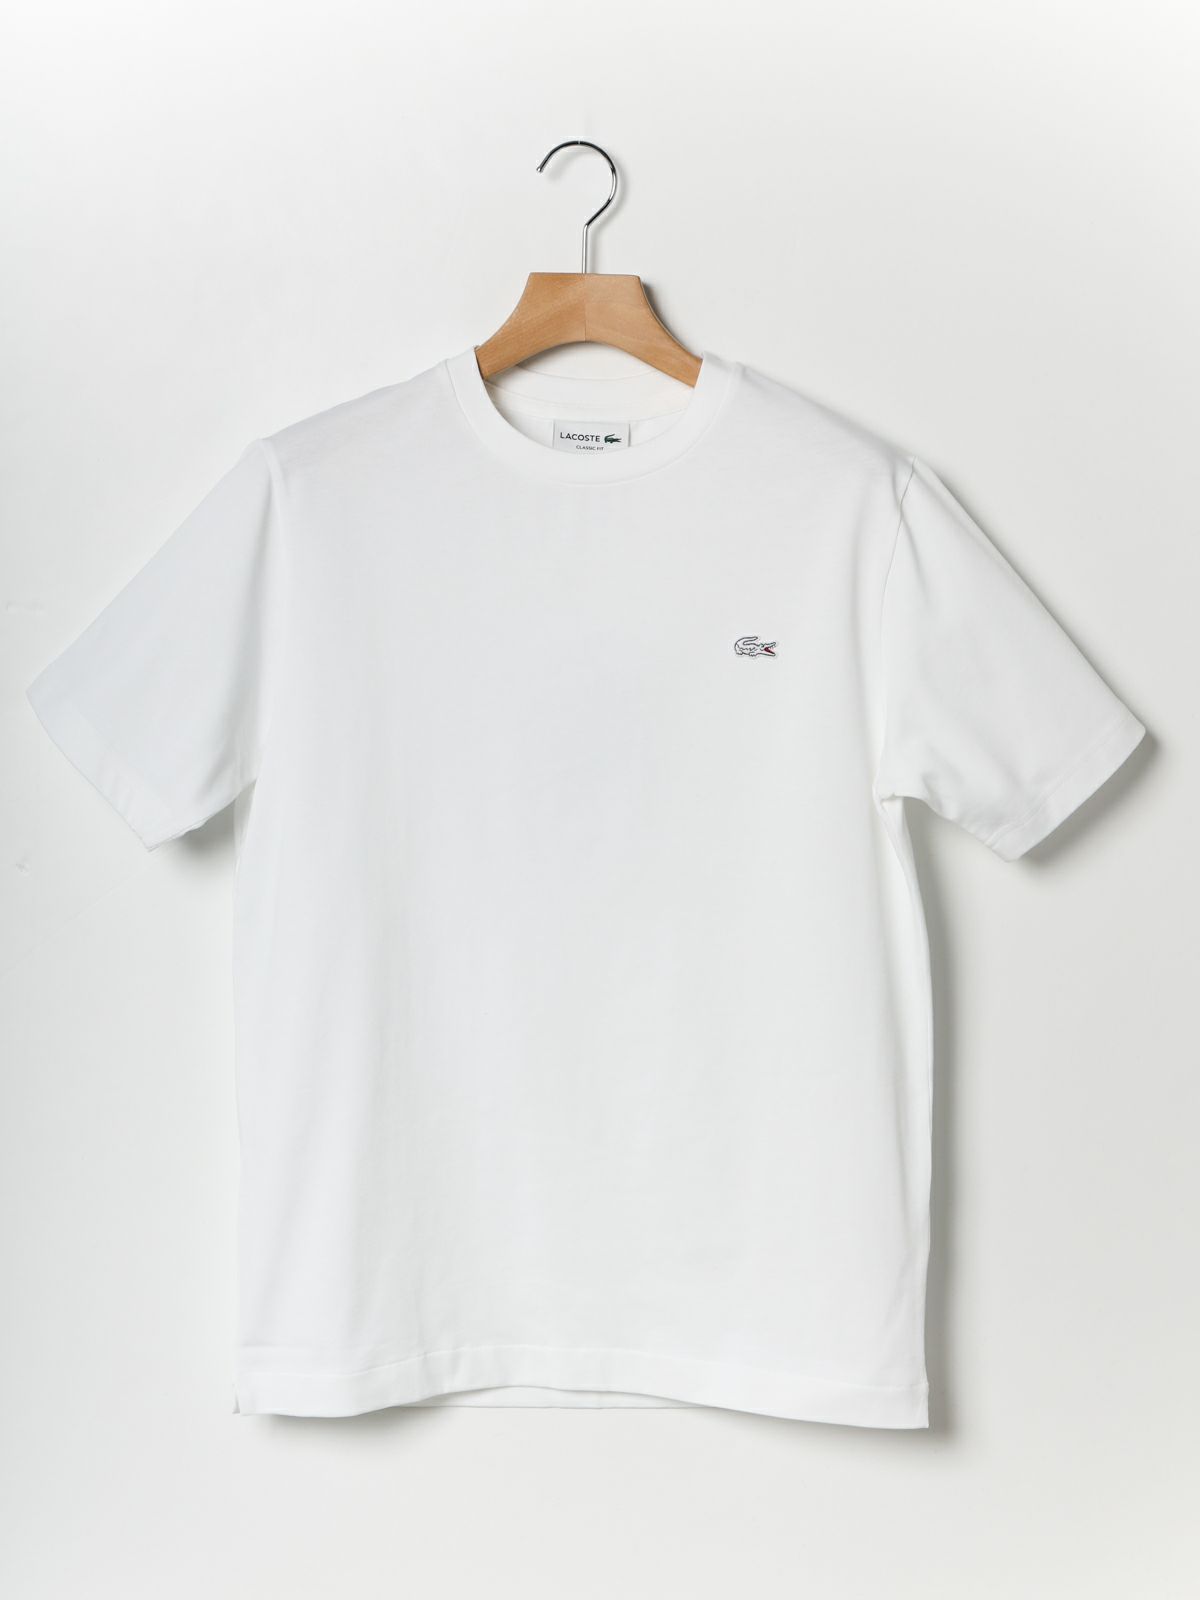 LACOSTE TH5582 TEE shirts